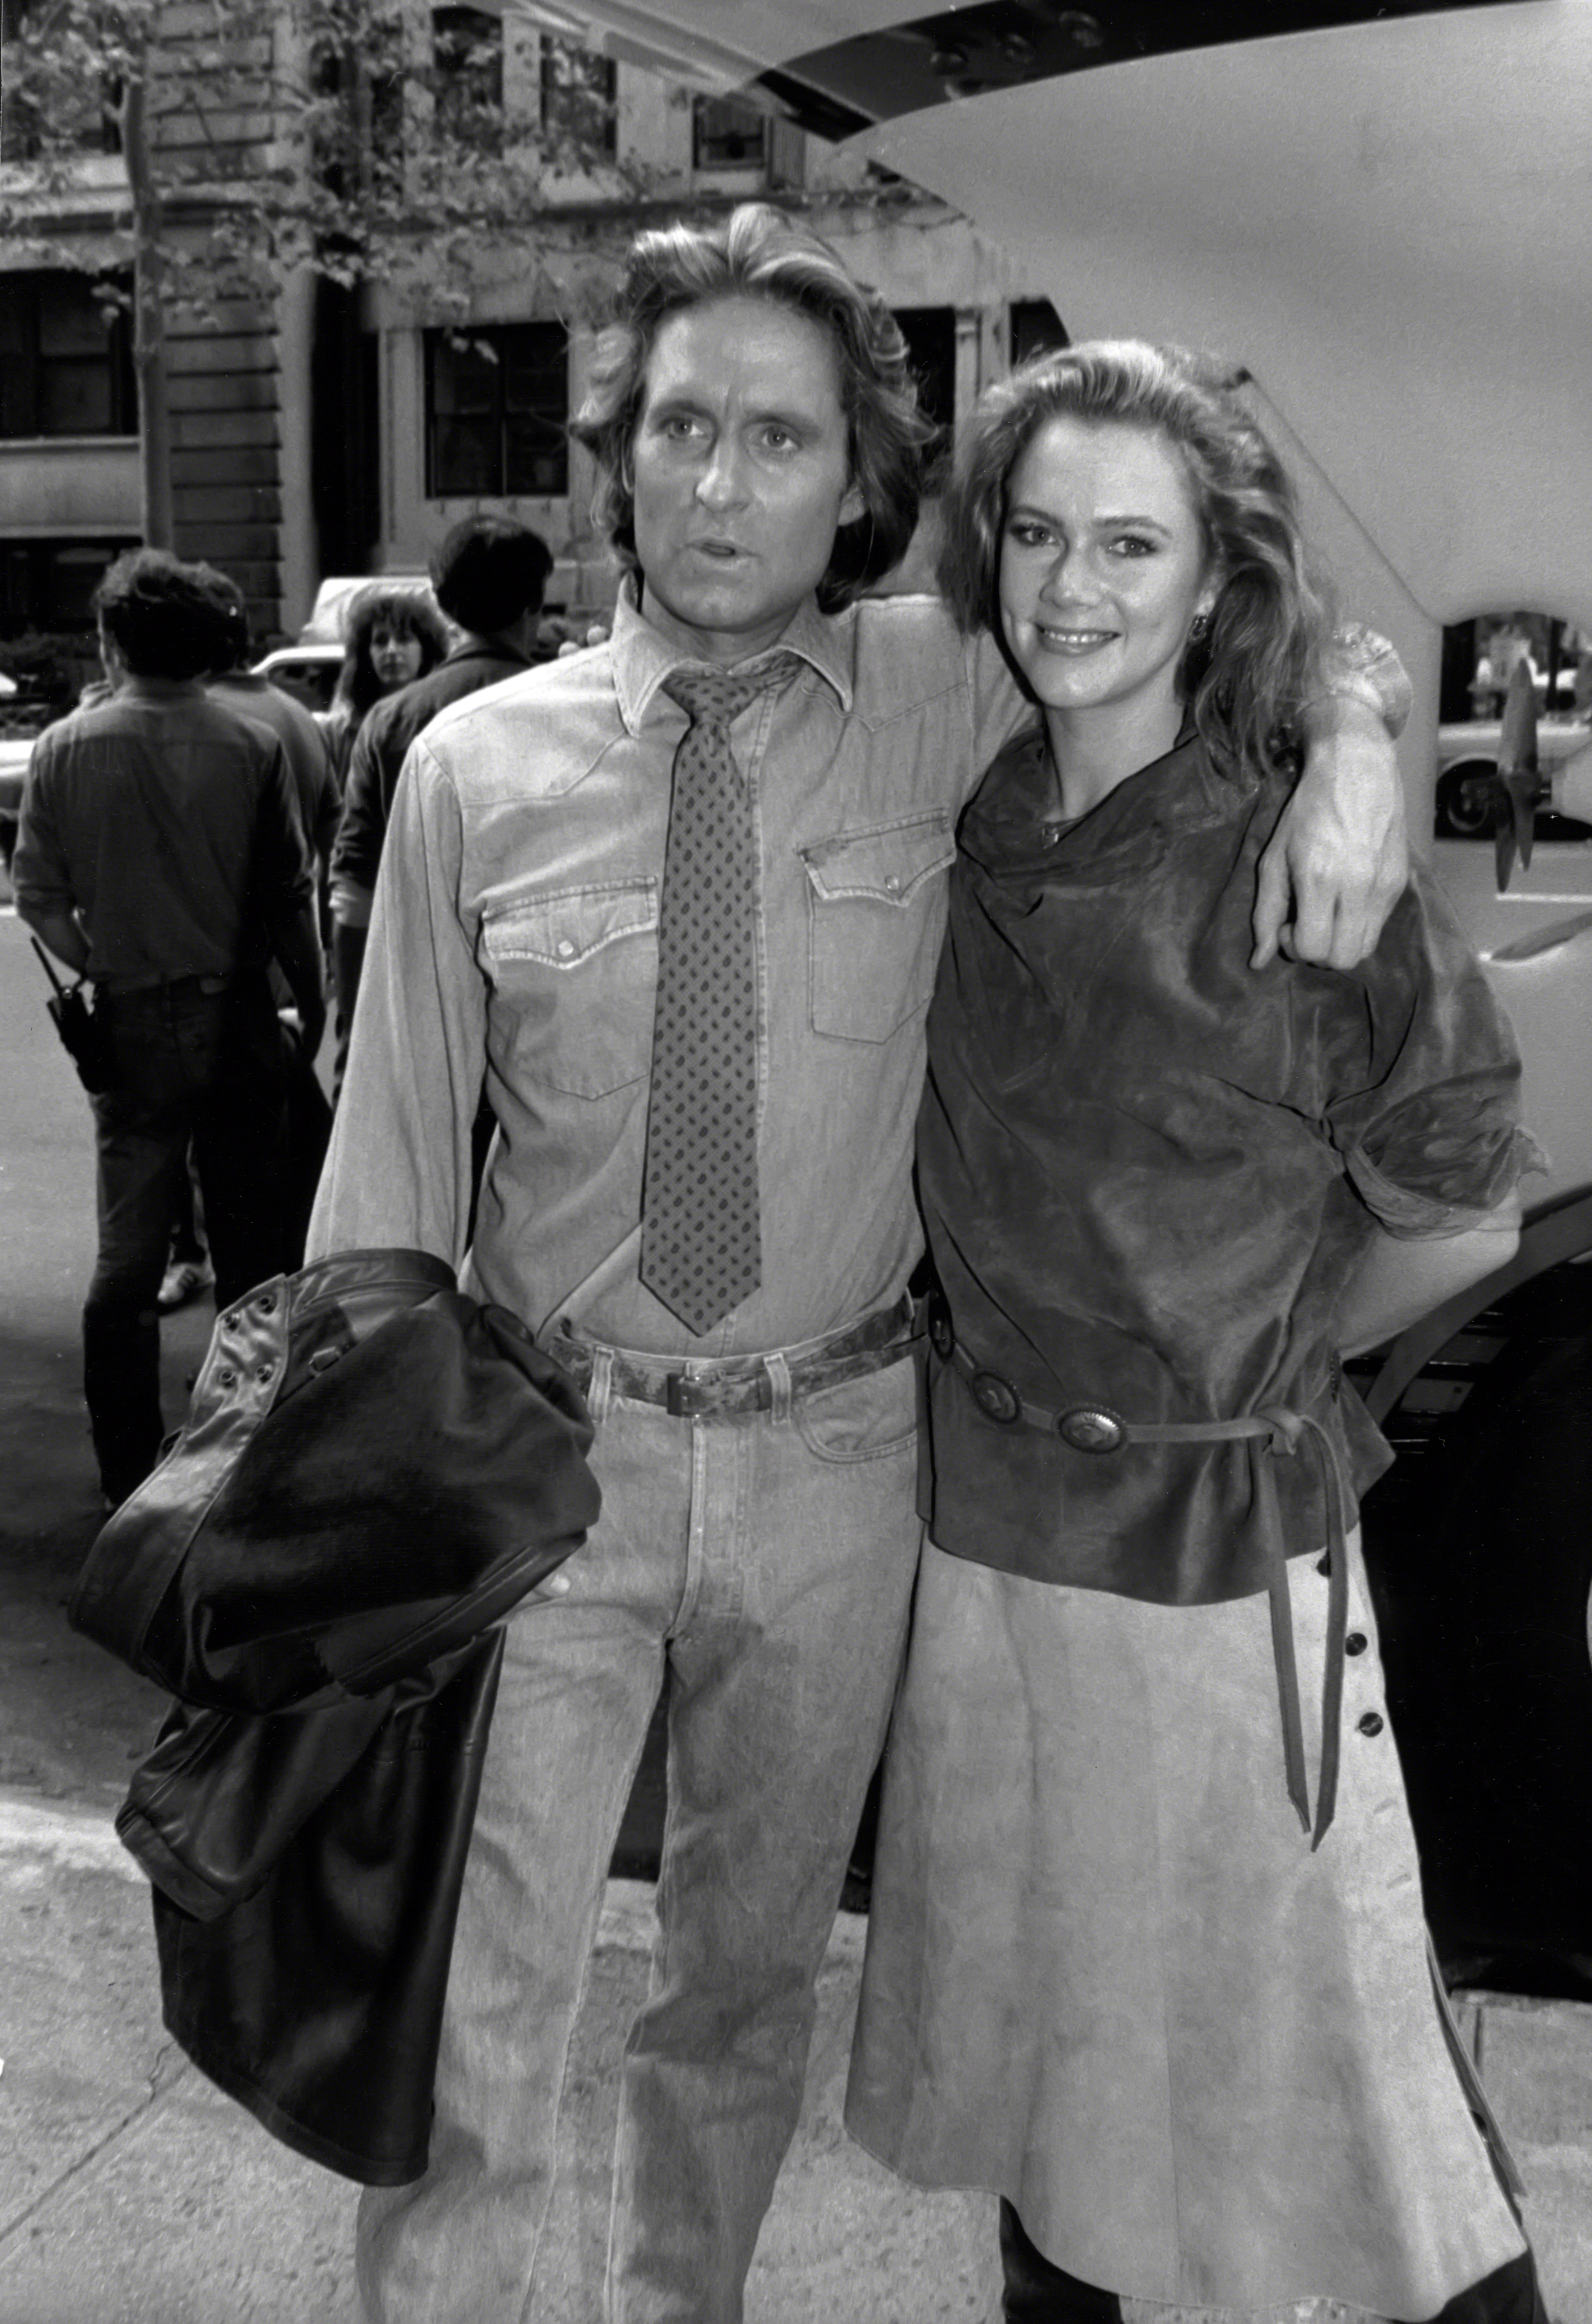 Michael Douglas and Kathleen Turner during promotions for "Romancing the Stone" in 1983 | Source: Getty Images